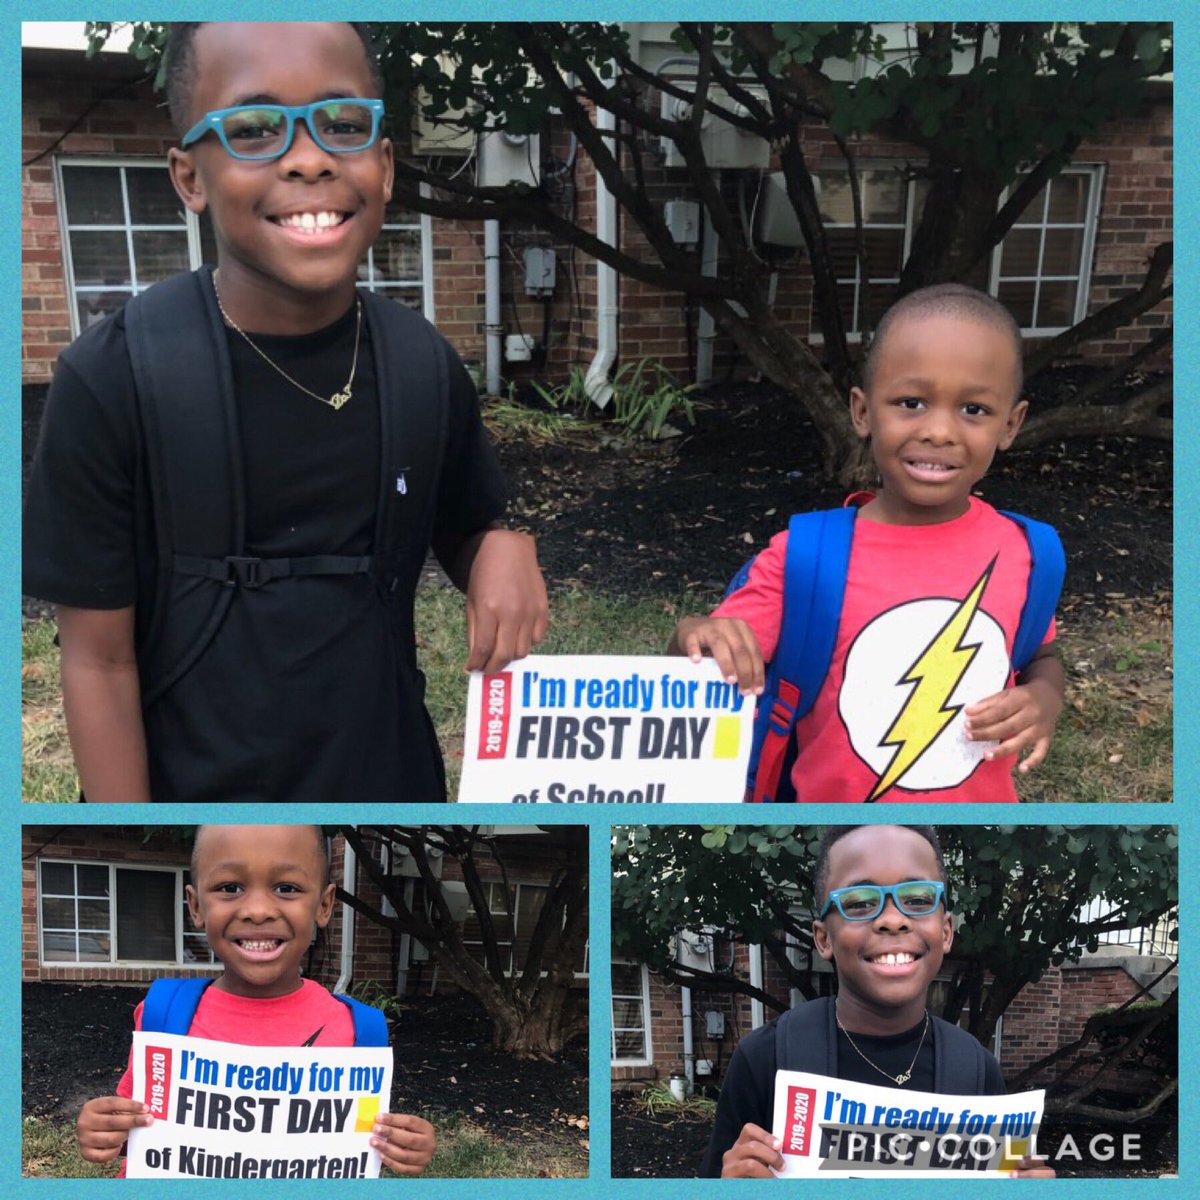 #FirstDayOfSchool2019 #PGCPS1stDay #PGCPSProud #CurryClan #